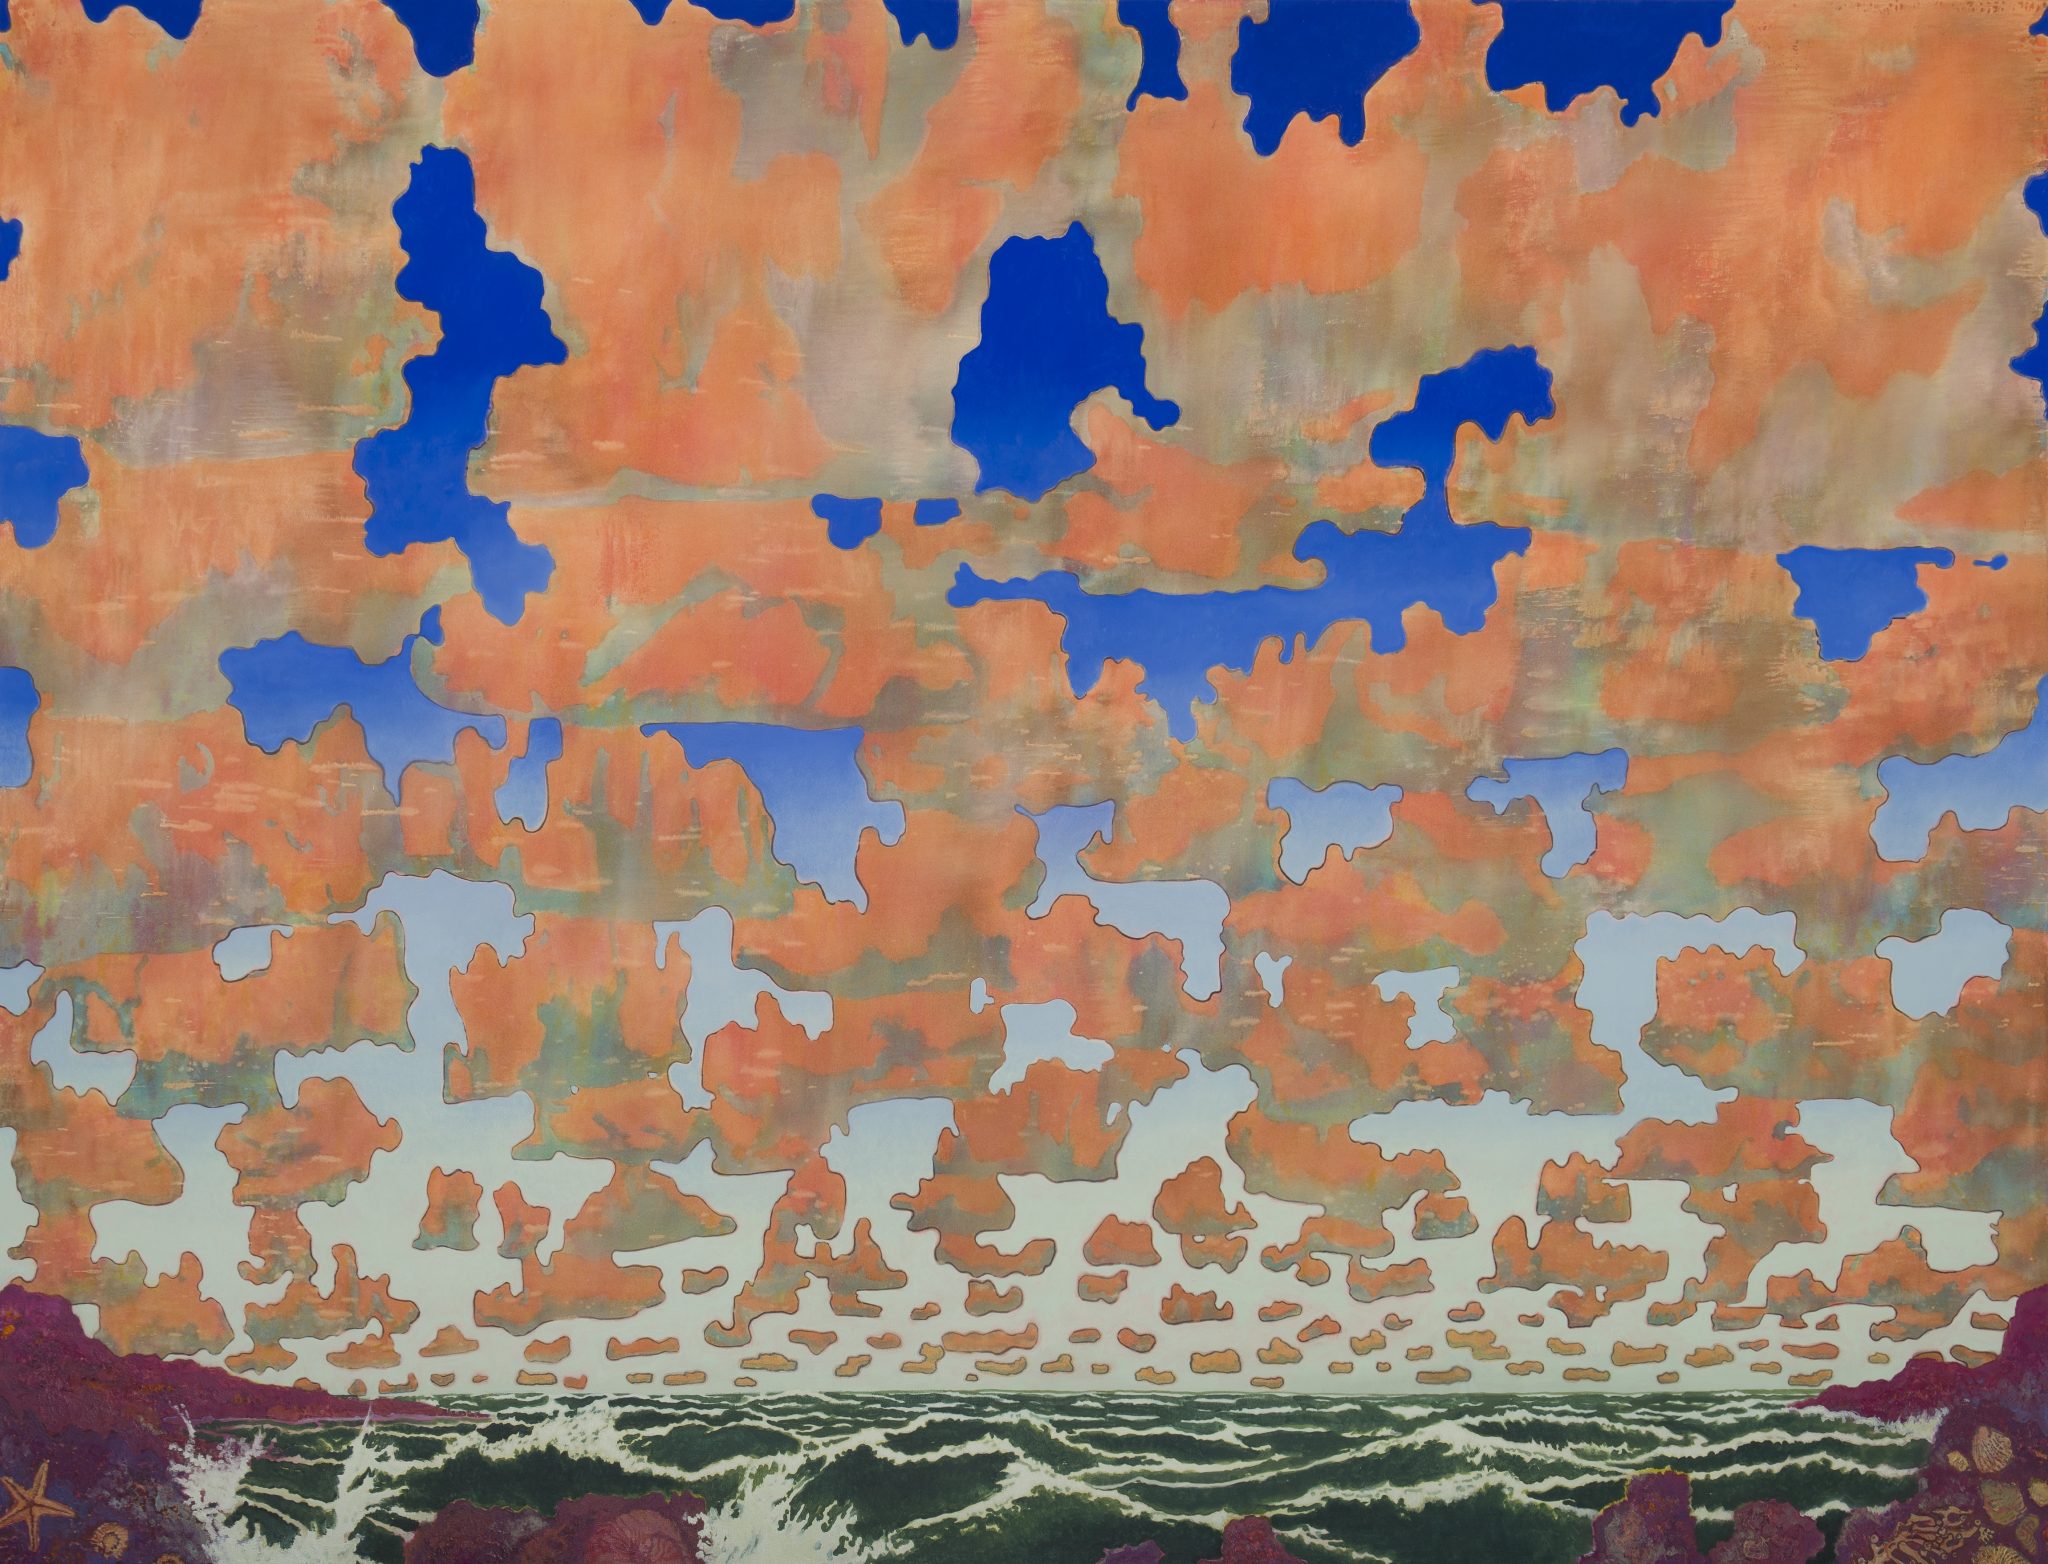 A painting of a vast blue sky with lots of orange clouds over it. At the bottom is the beach front with waves lapping around